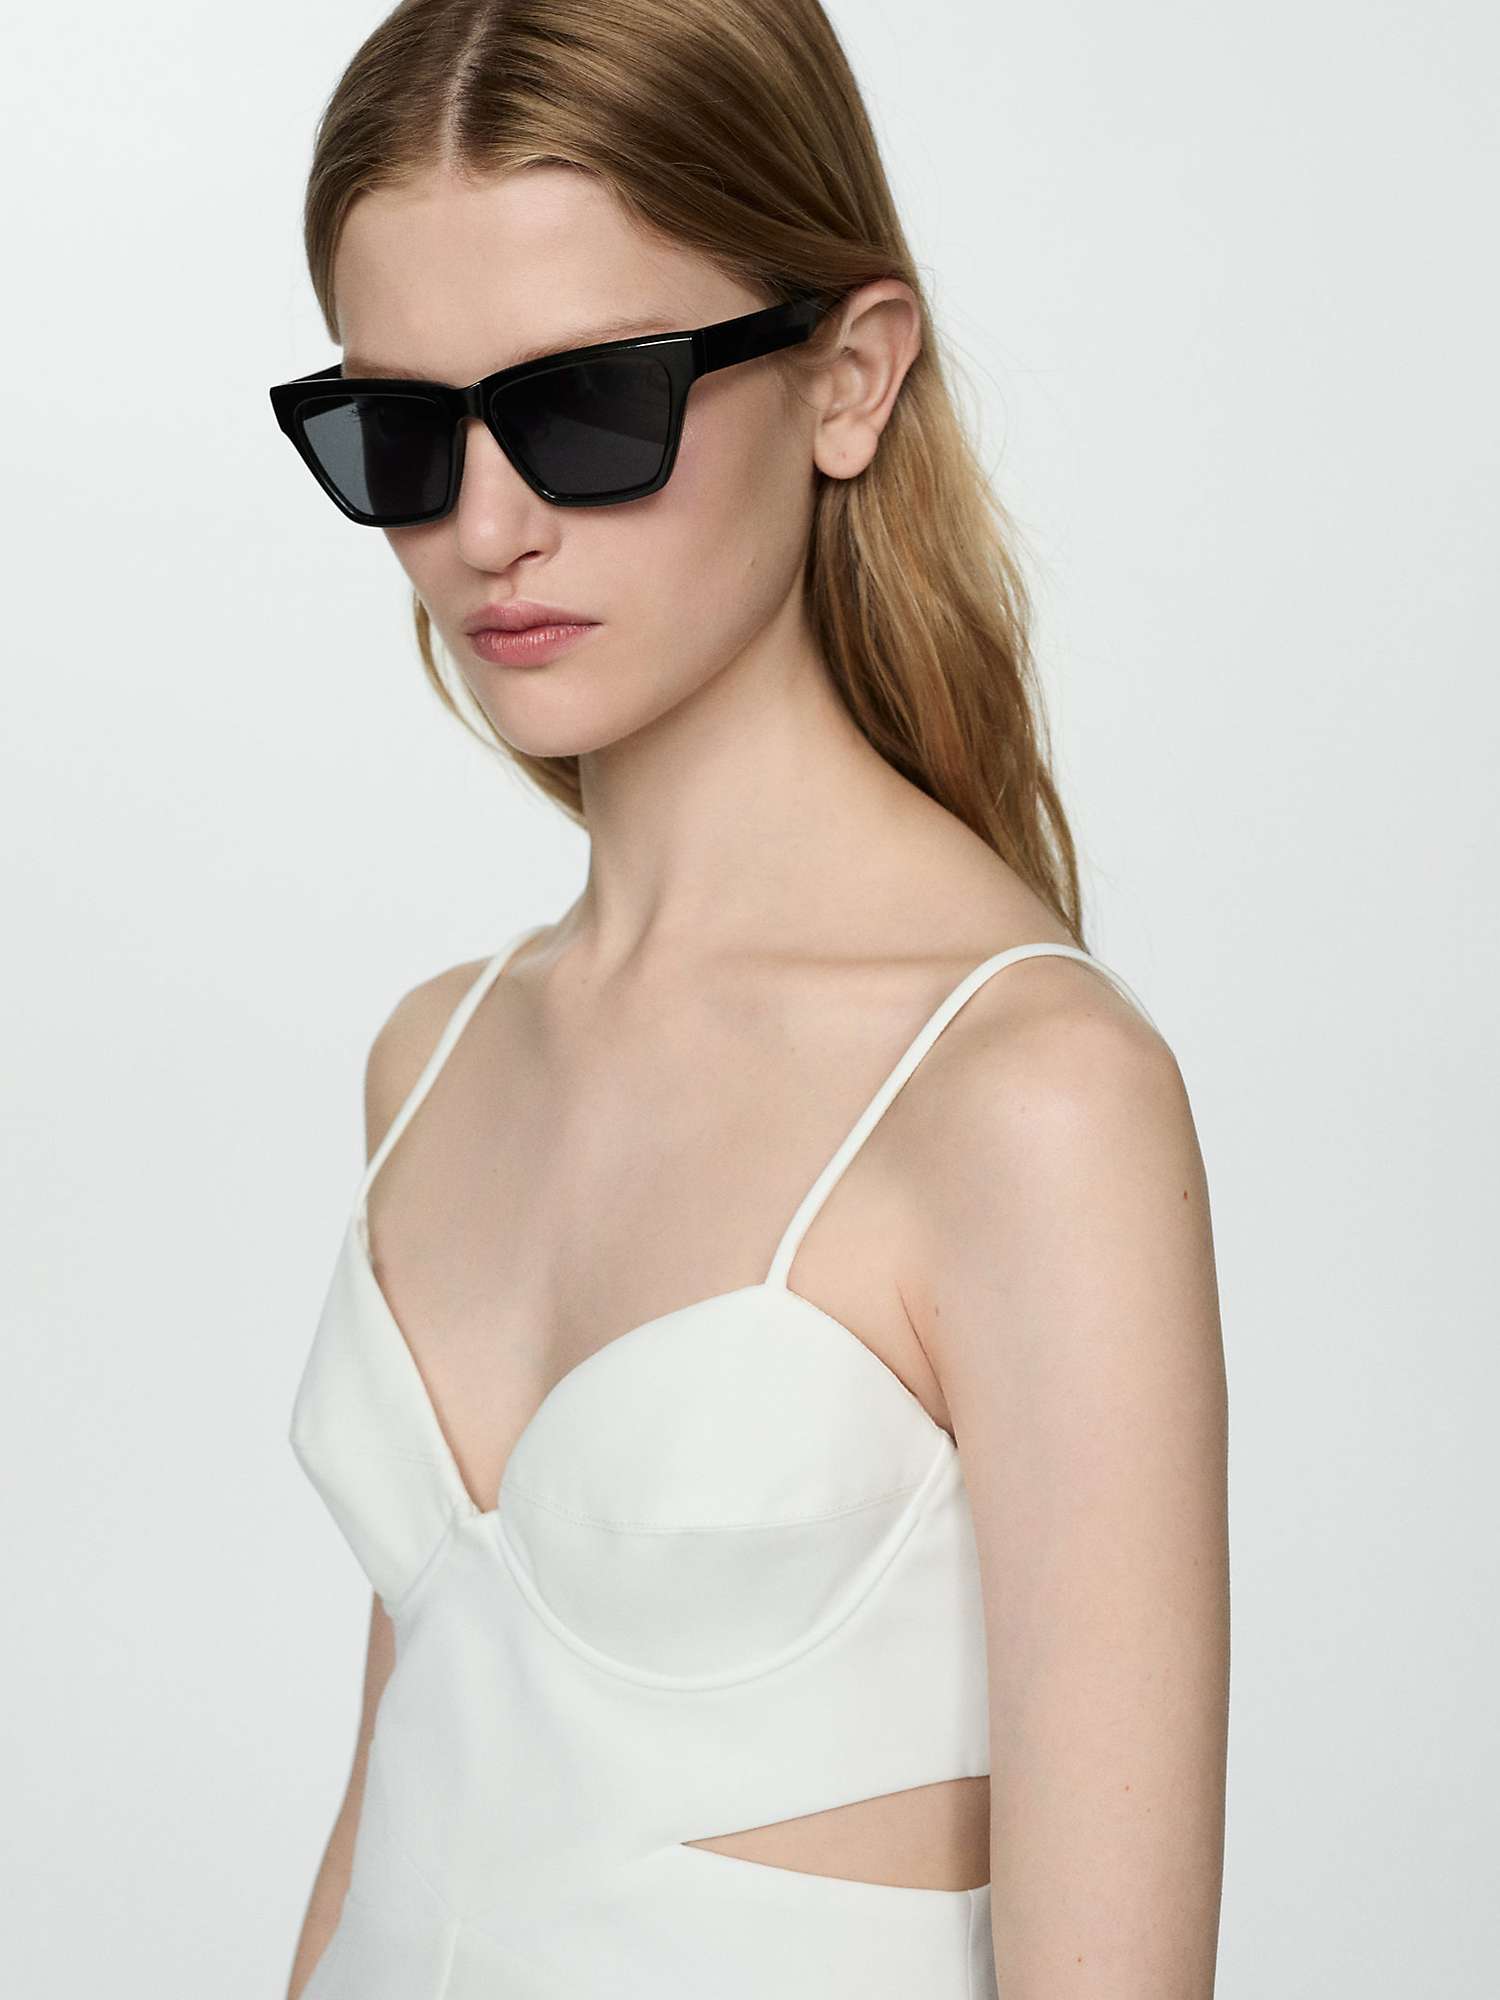 Buy Mango Tyna Side Cutout Jumpsuit, White Online at johnlewis.com